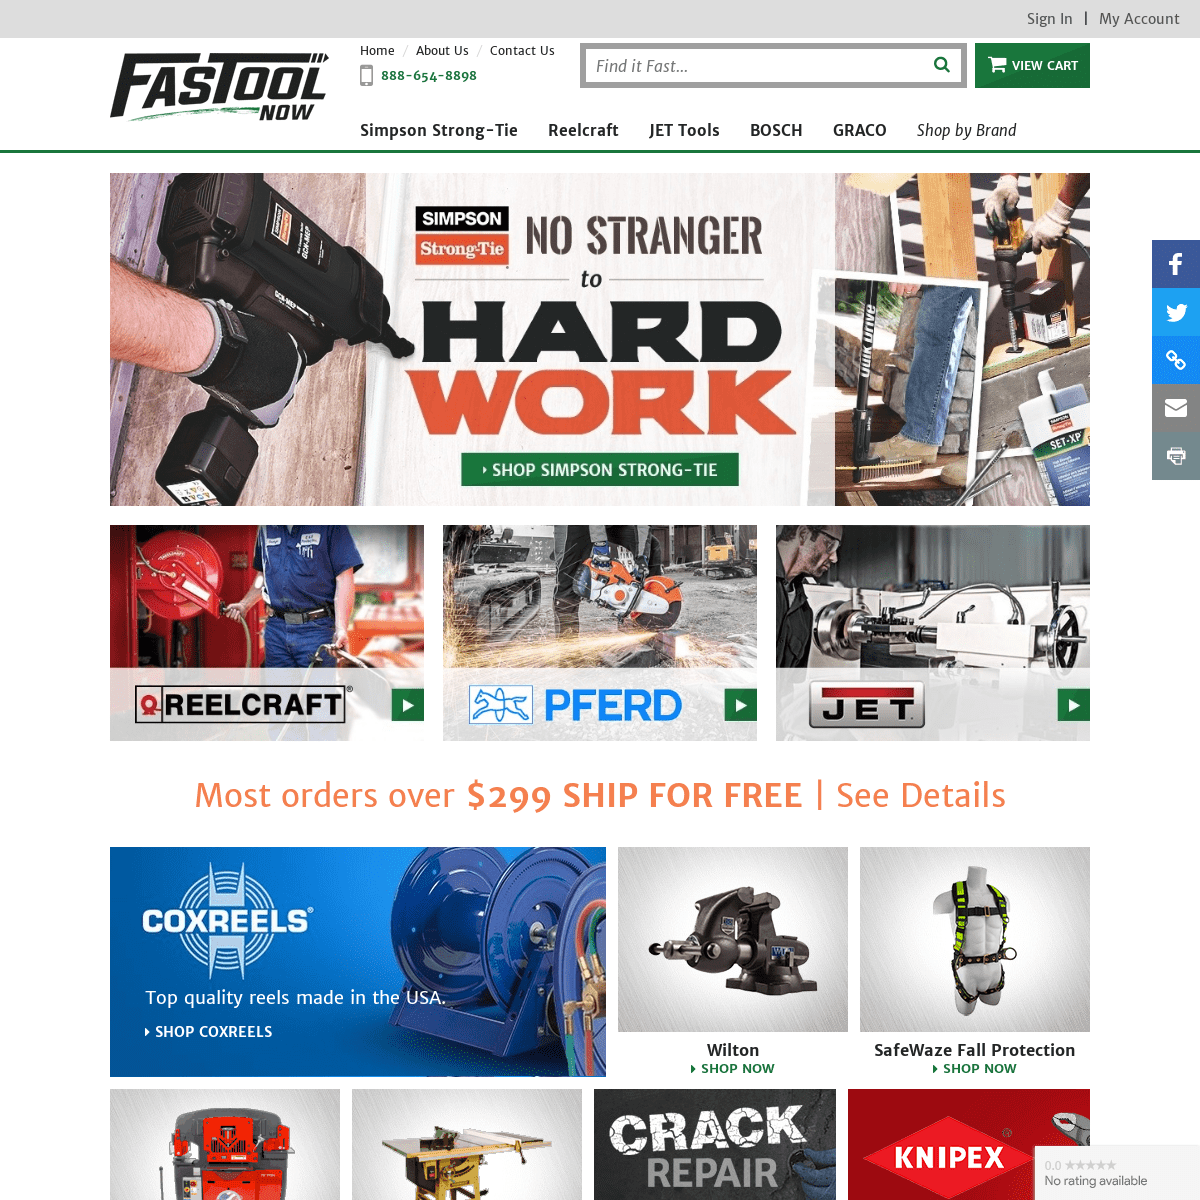 Shop Construction Equipment, Tools & More at FastoolNow